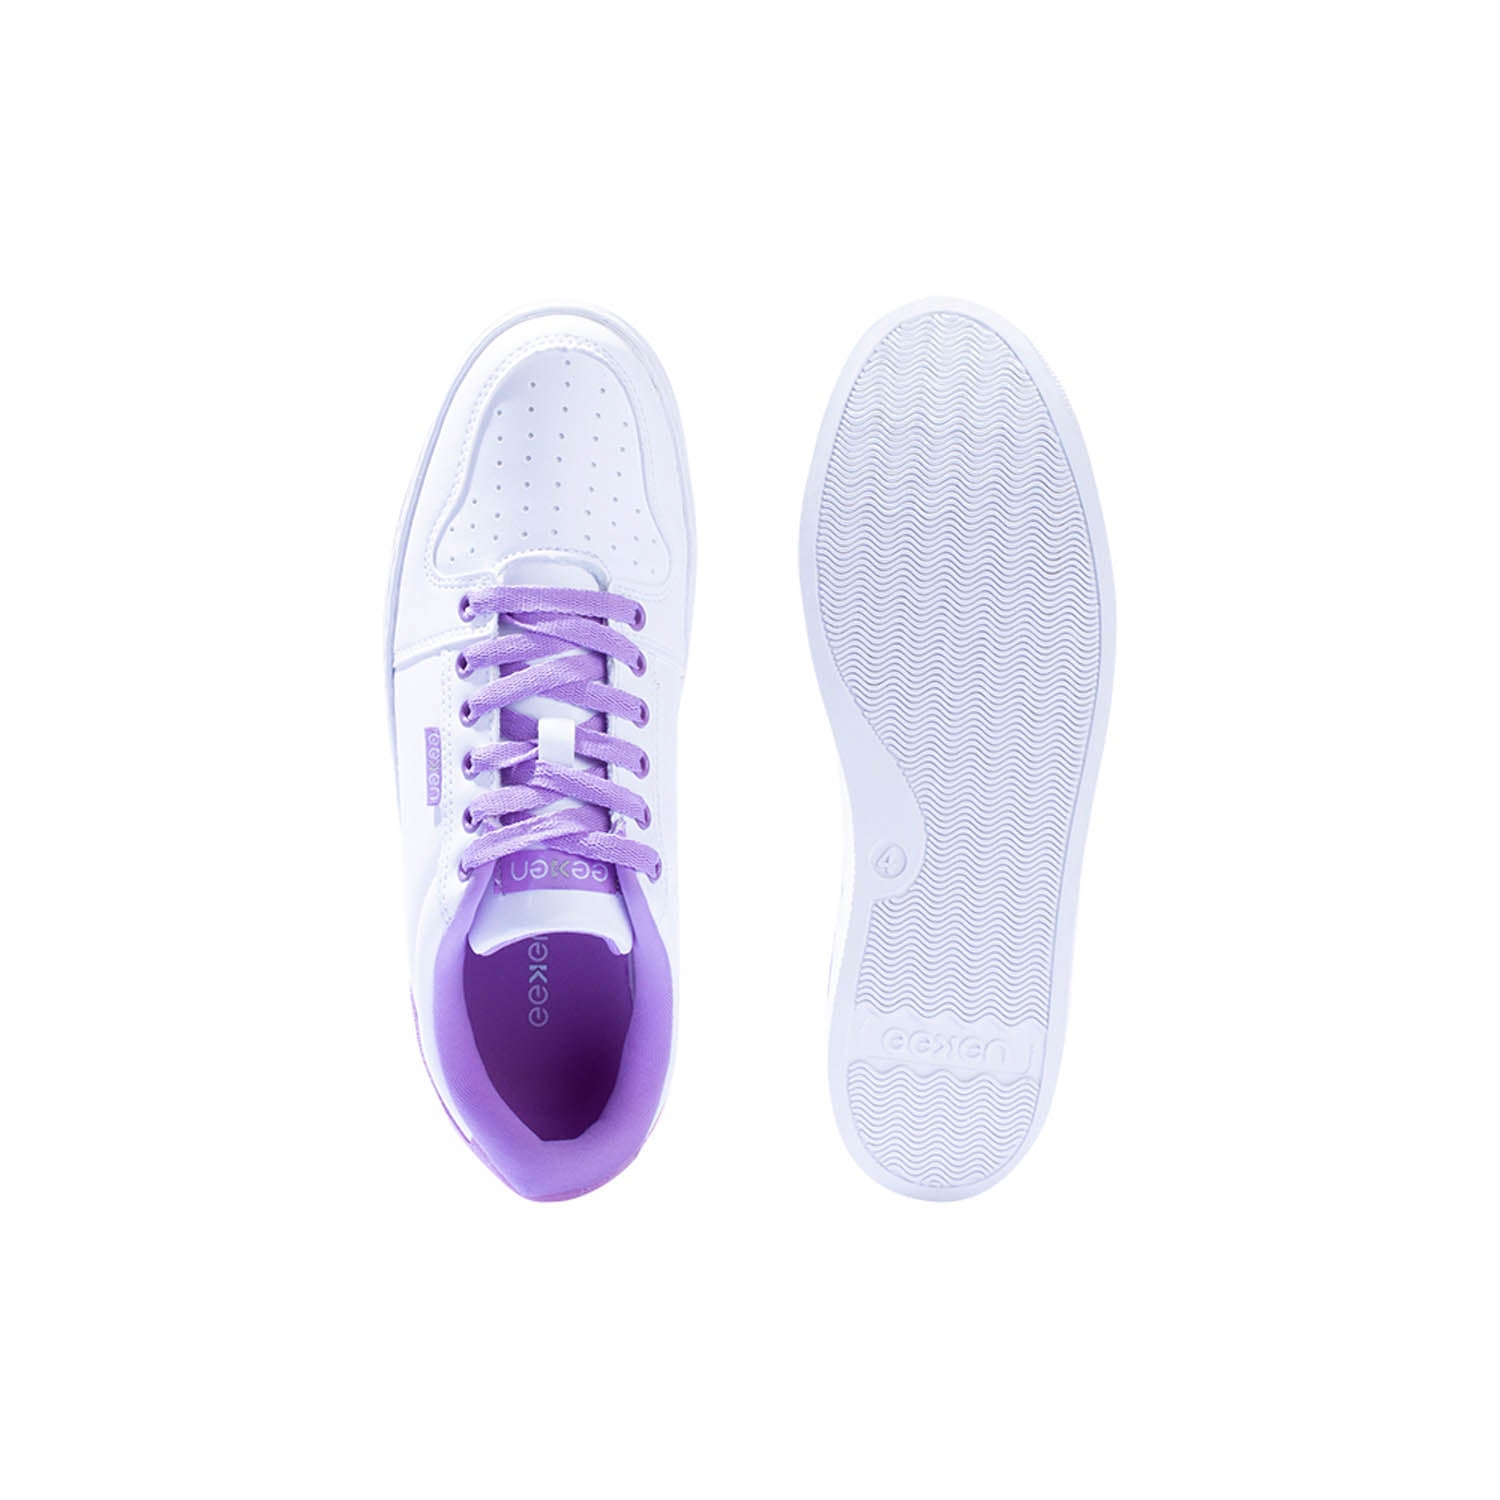 Eeken Womens White / Diffusion Orchid Casual Shoes